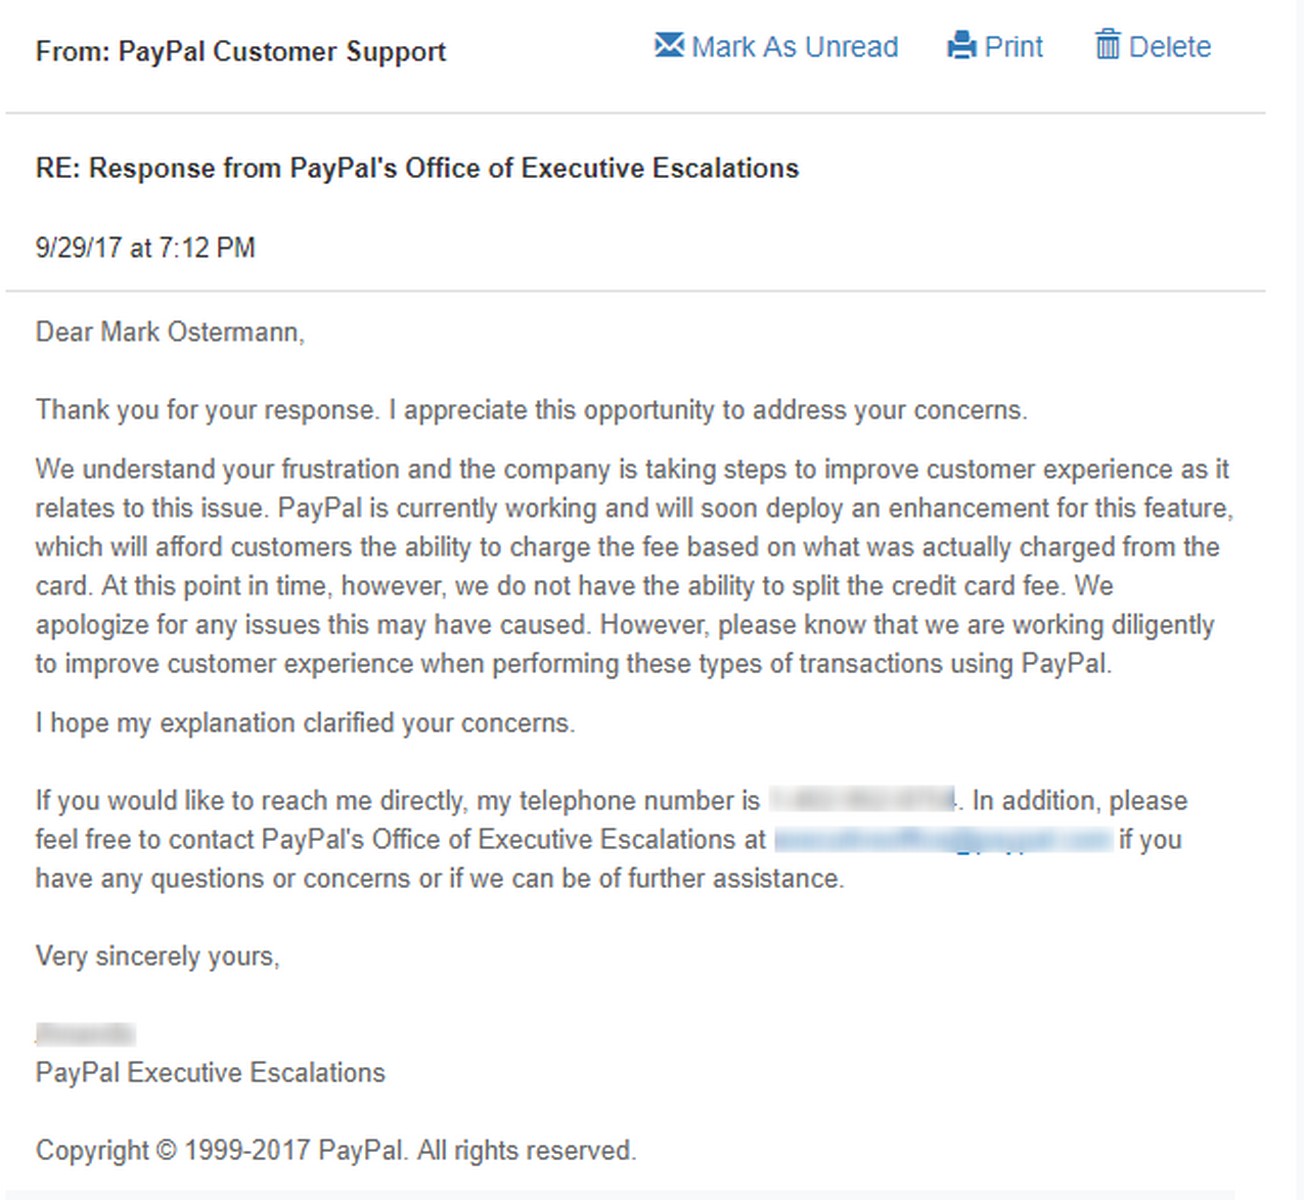 PayPal's Response to Overbilling